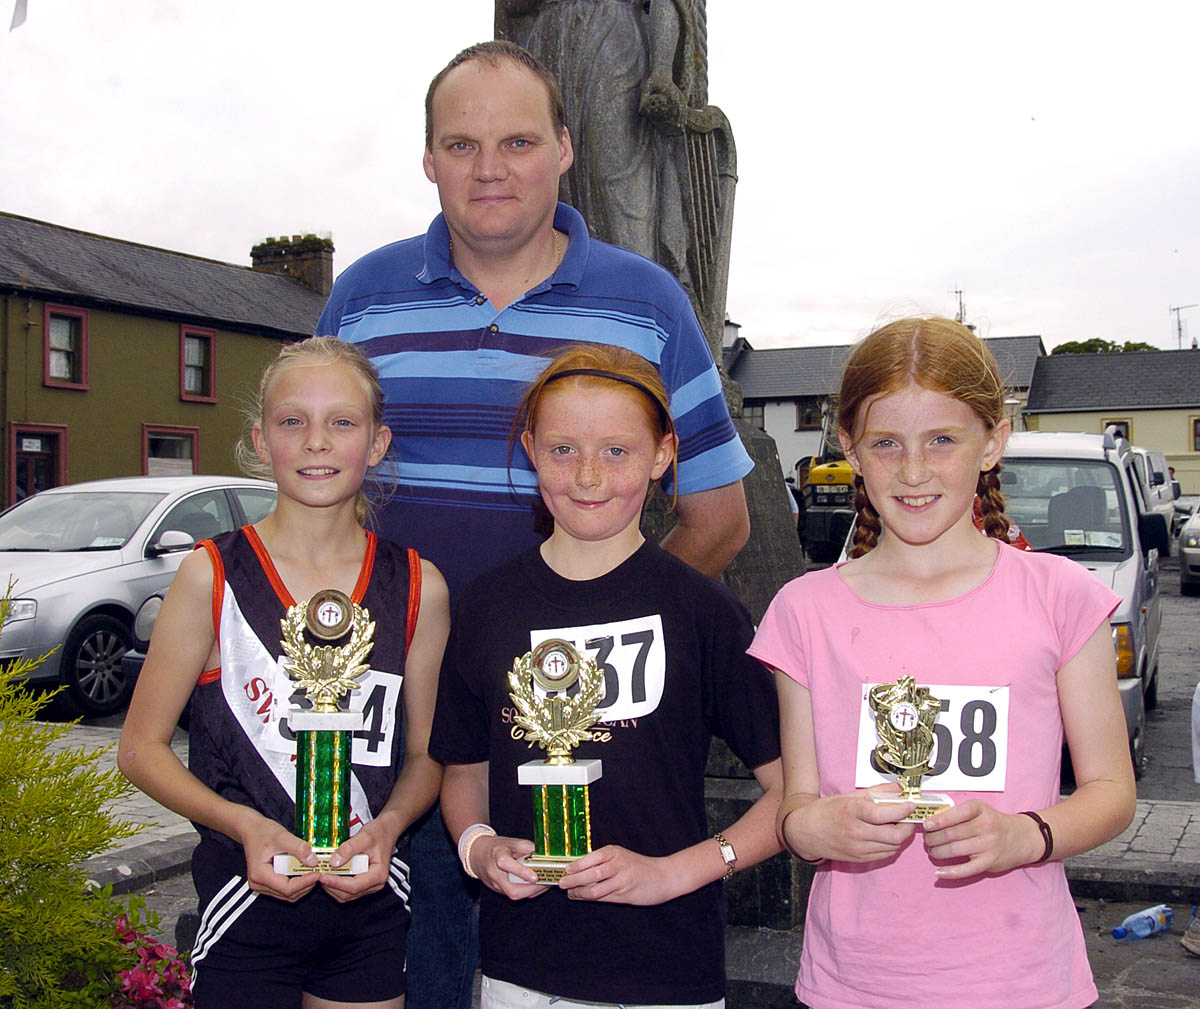 Balla 13th Annual 10K Road Race 2007 Winners in the Girls Junior Section L-R: Rosie Hynes 1st, Rachel McGreal 2nd ,Shauna Smyth 3rd, pictured with Donagh Gilmartin (Sheebeen Bar Balla Sponsor). Photo  Ken Wright Photography 2007. 

